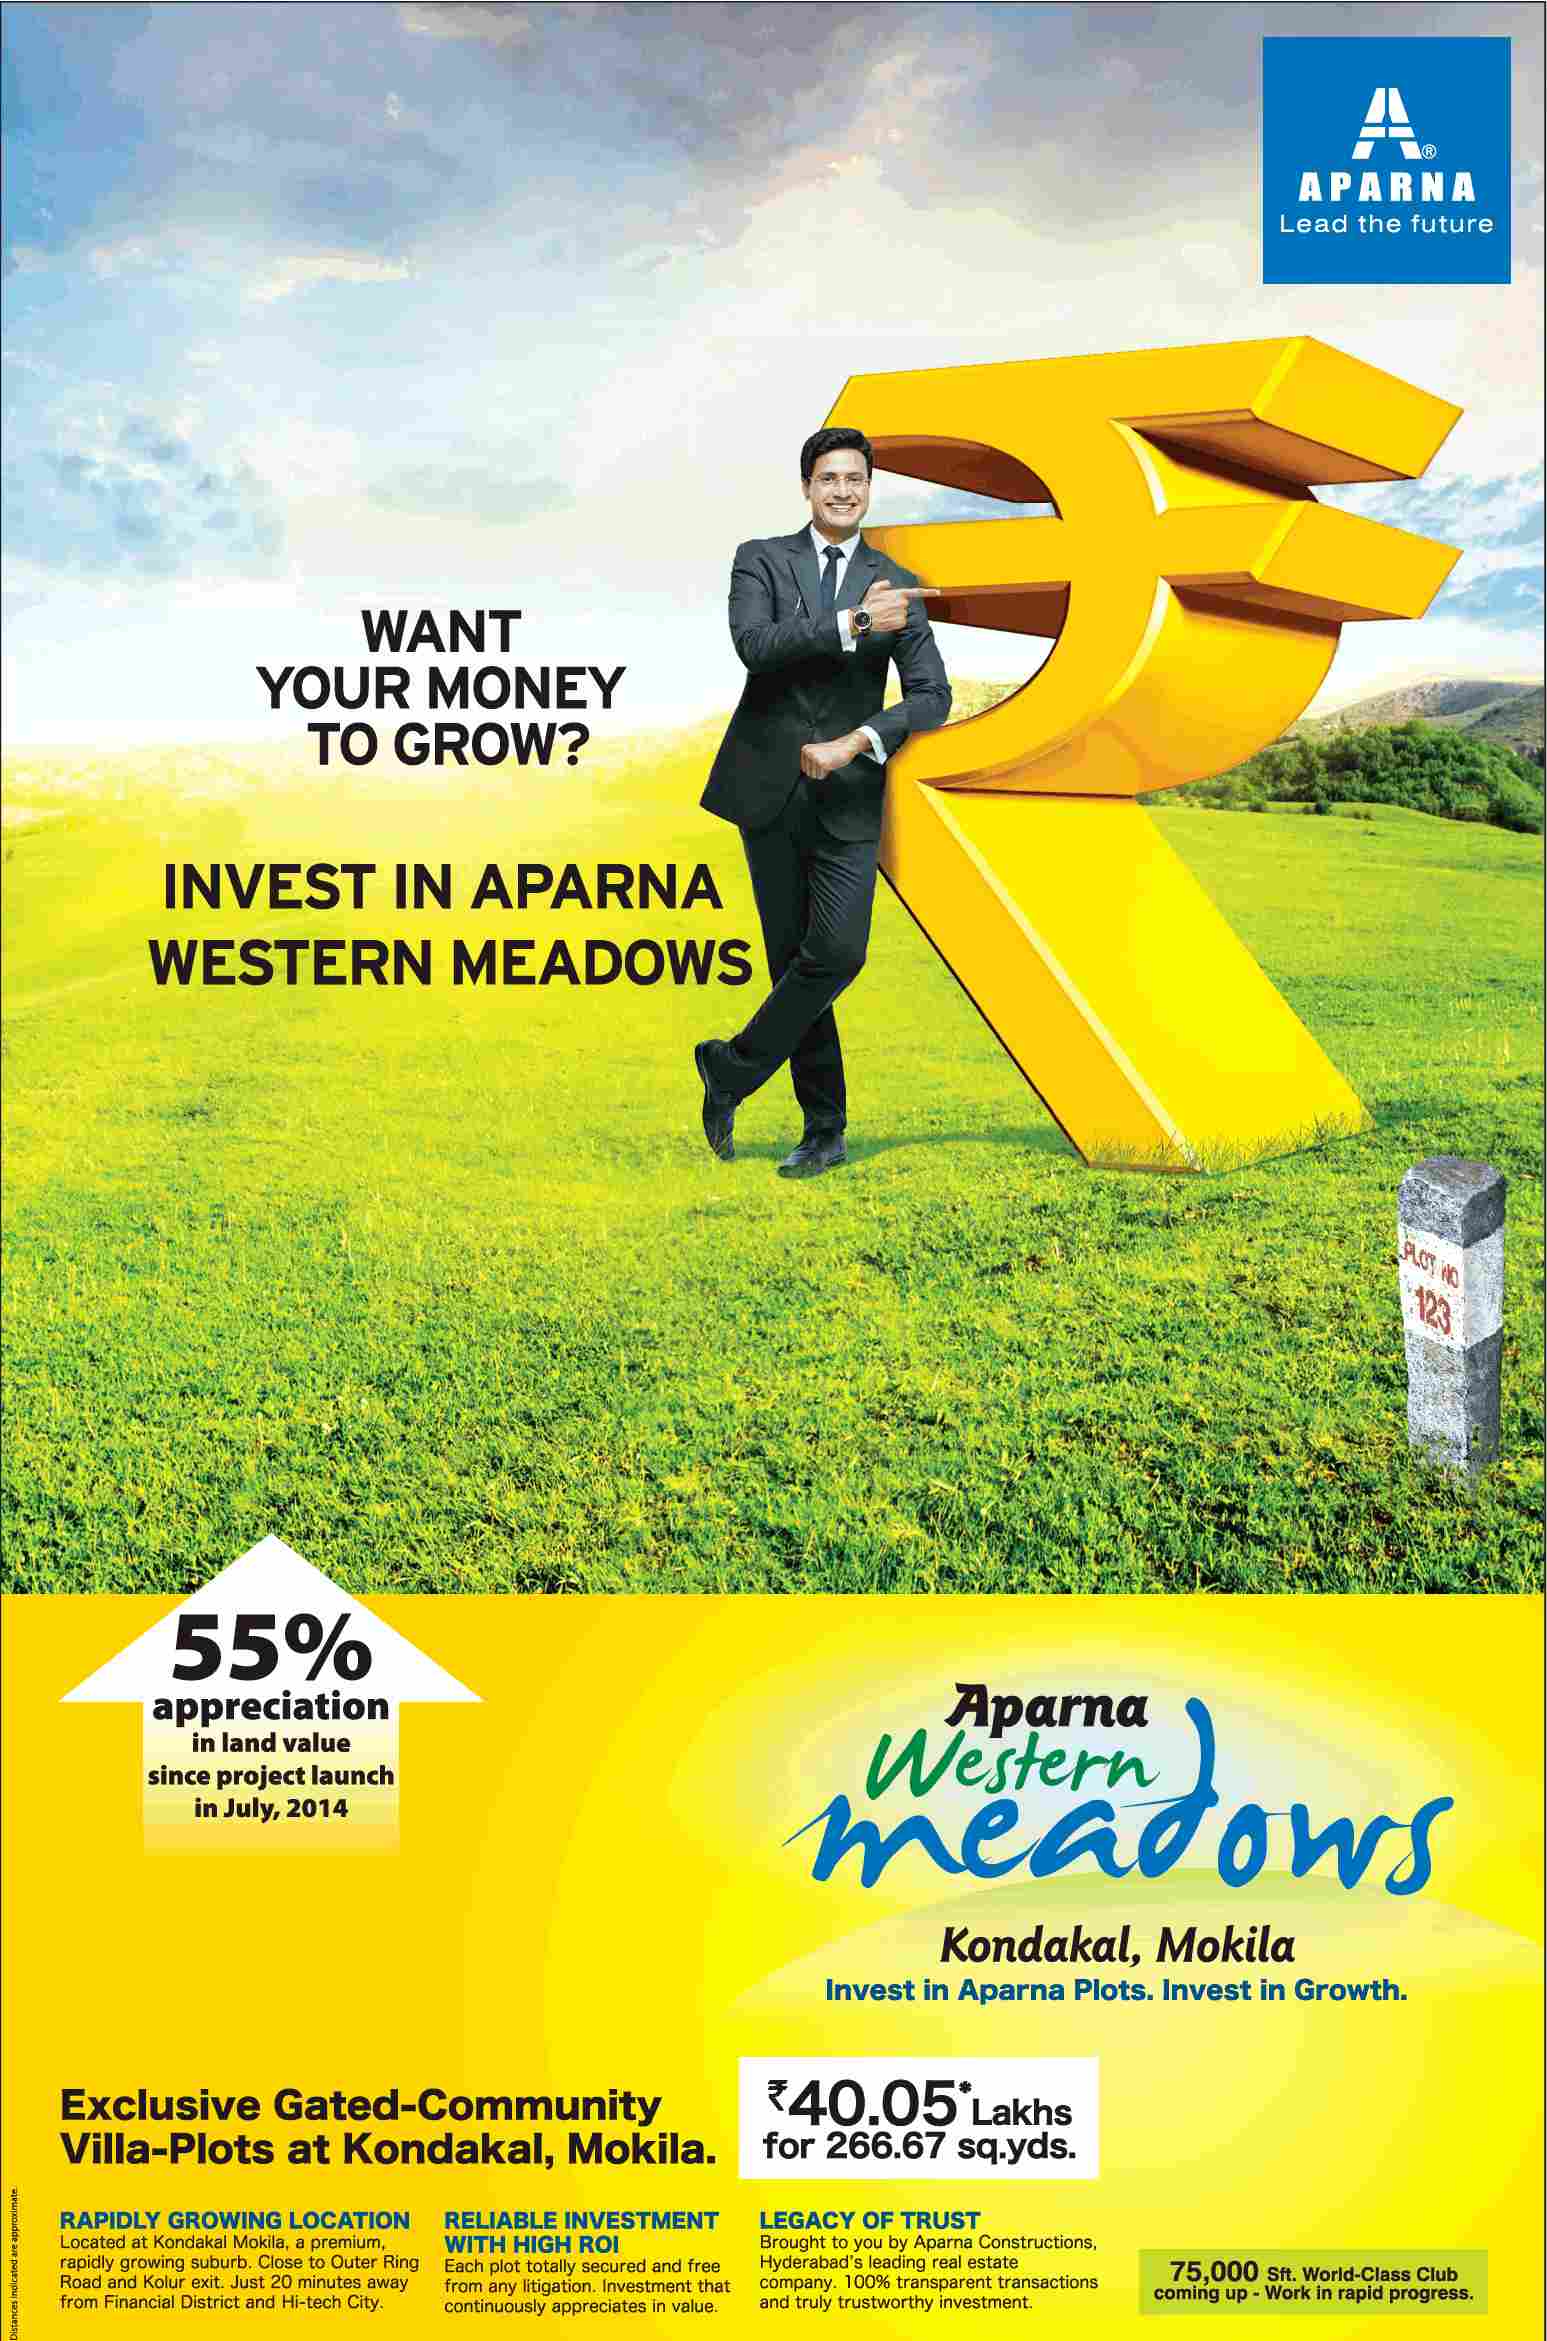 Want your money to grow than invest in Aparna Western Meadows in Hyderabad Update